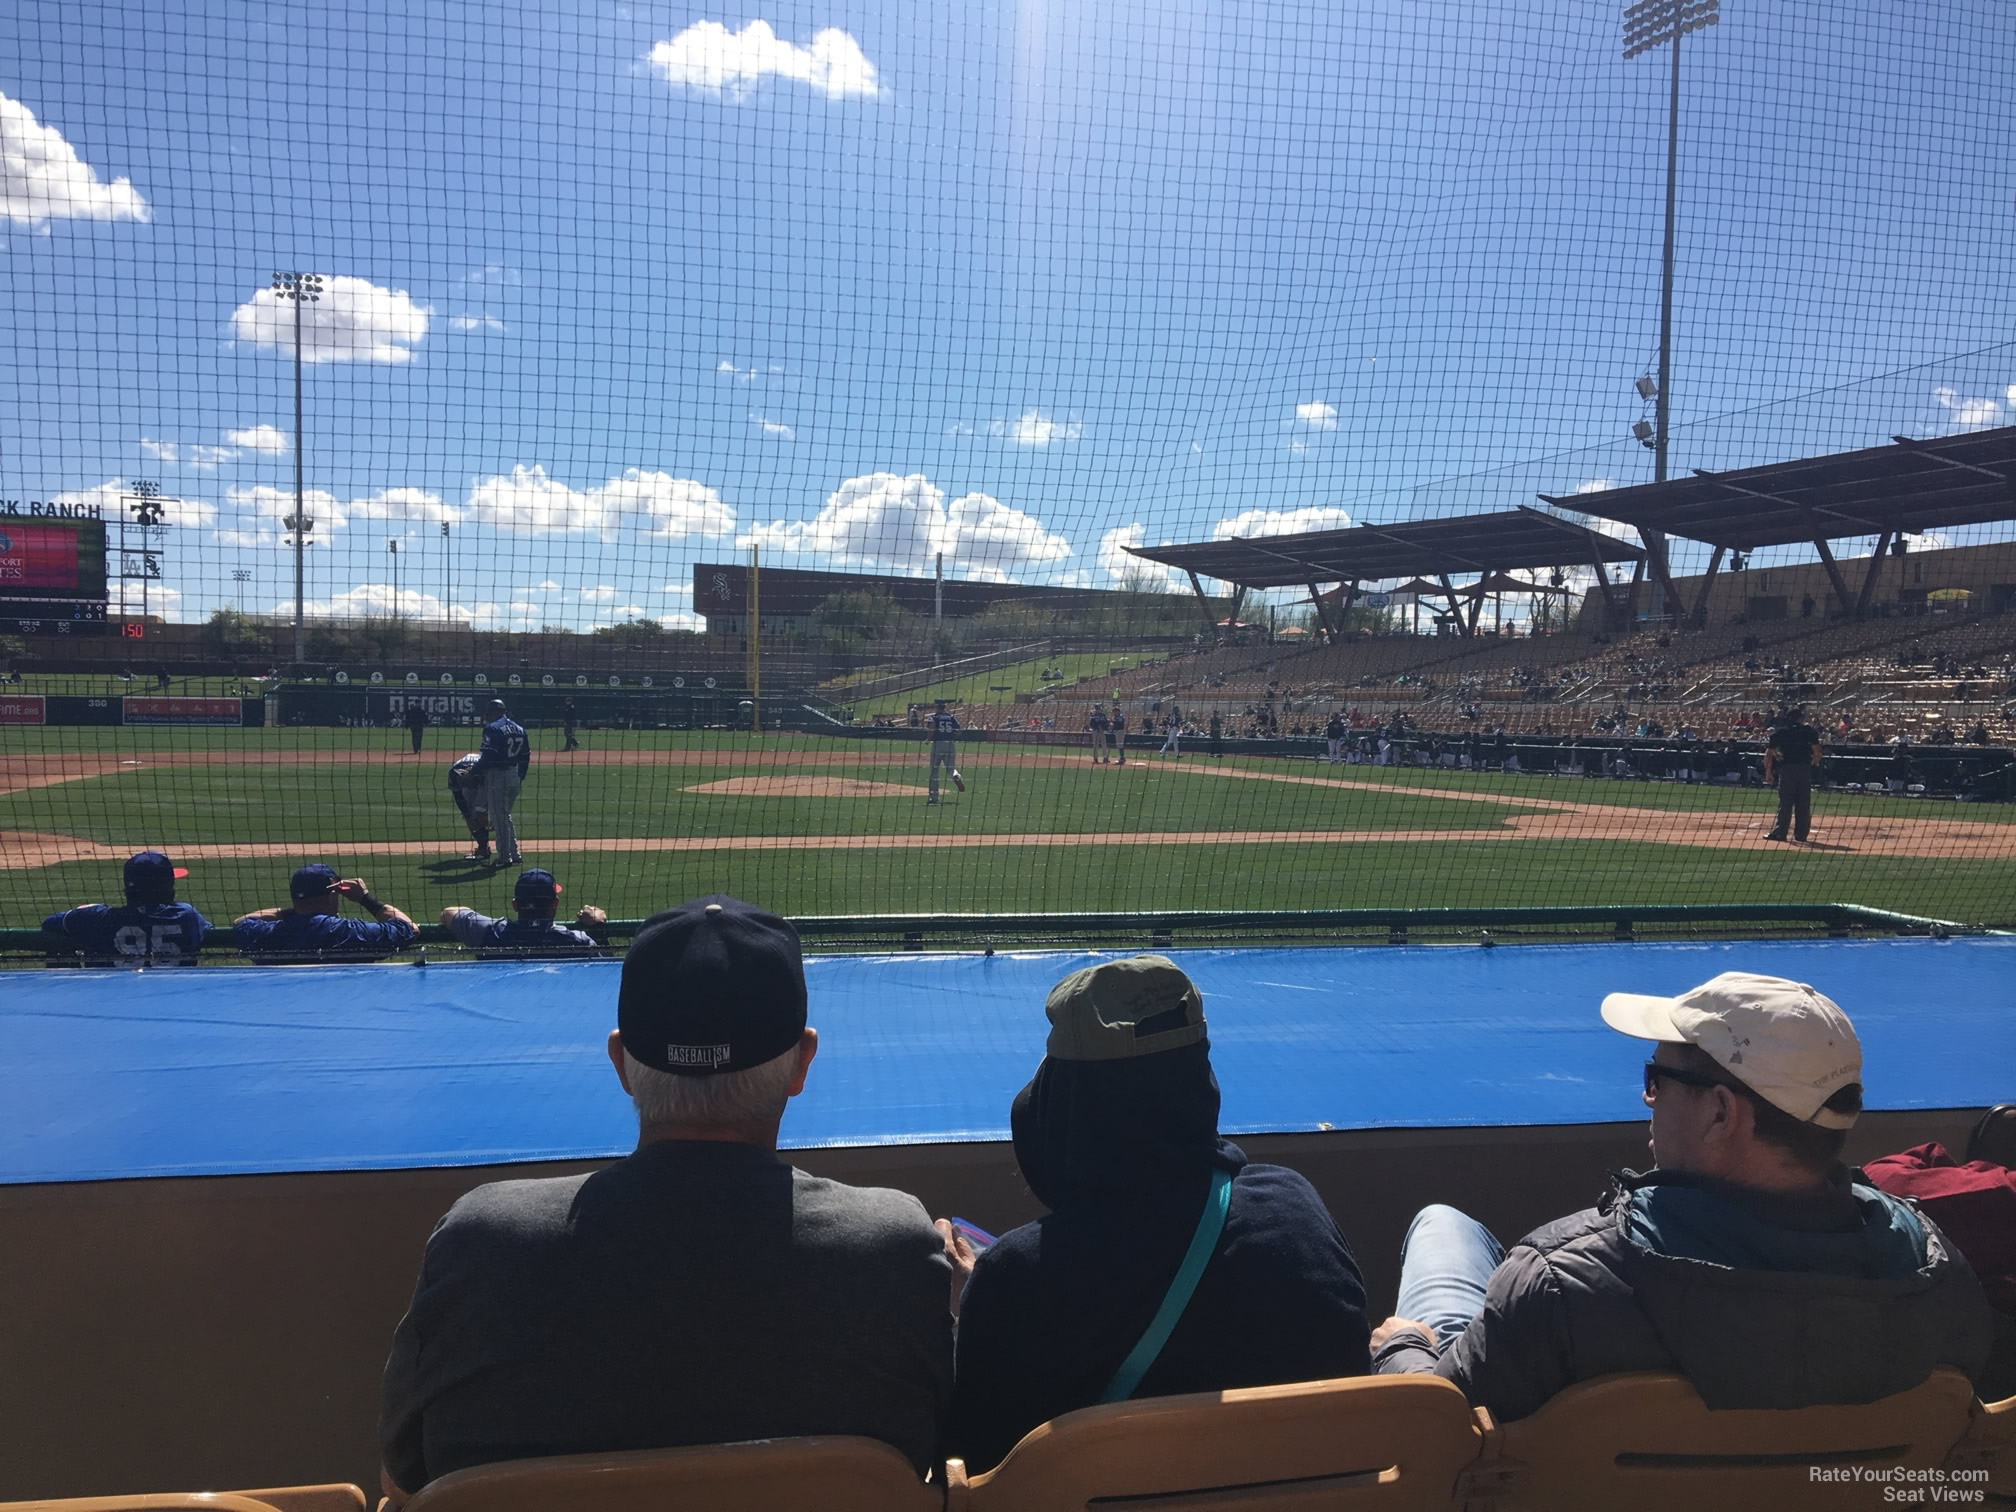 section 21, row 6 seat view  - camelback ranch